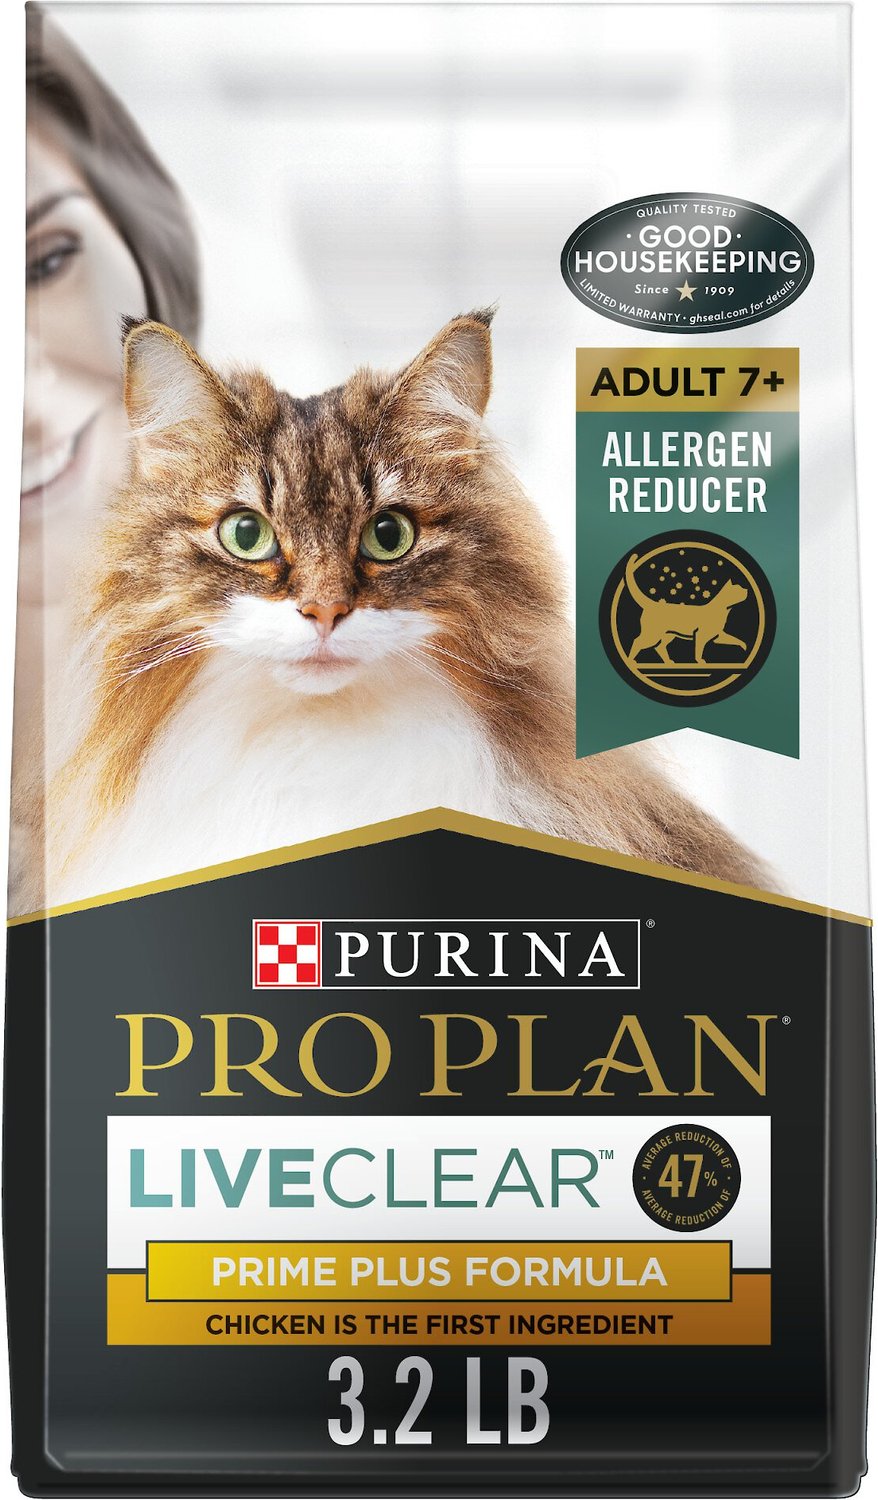 Purina Pro Plan LIVECLEAR Adult 7+ Dry Cat Food